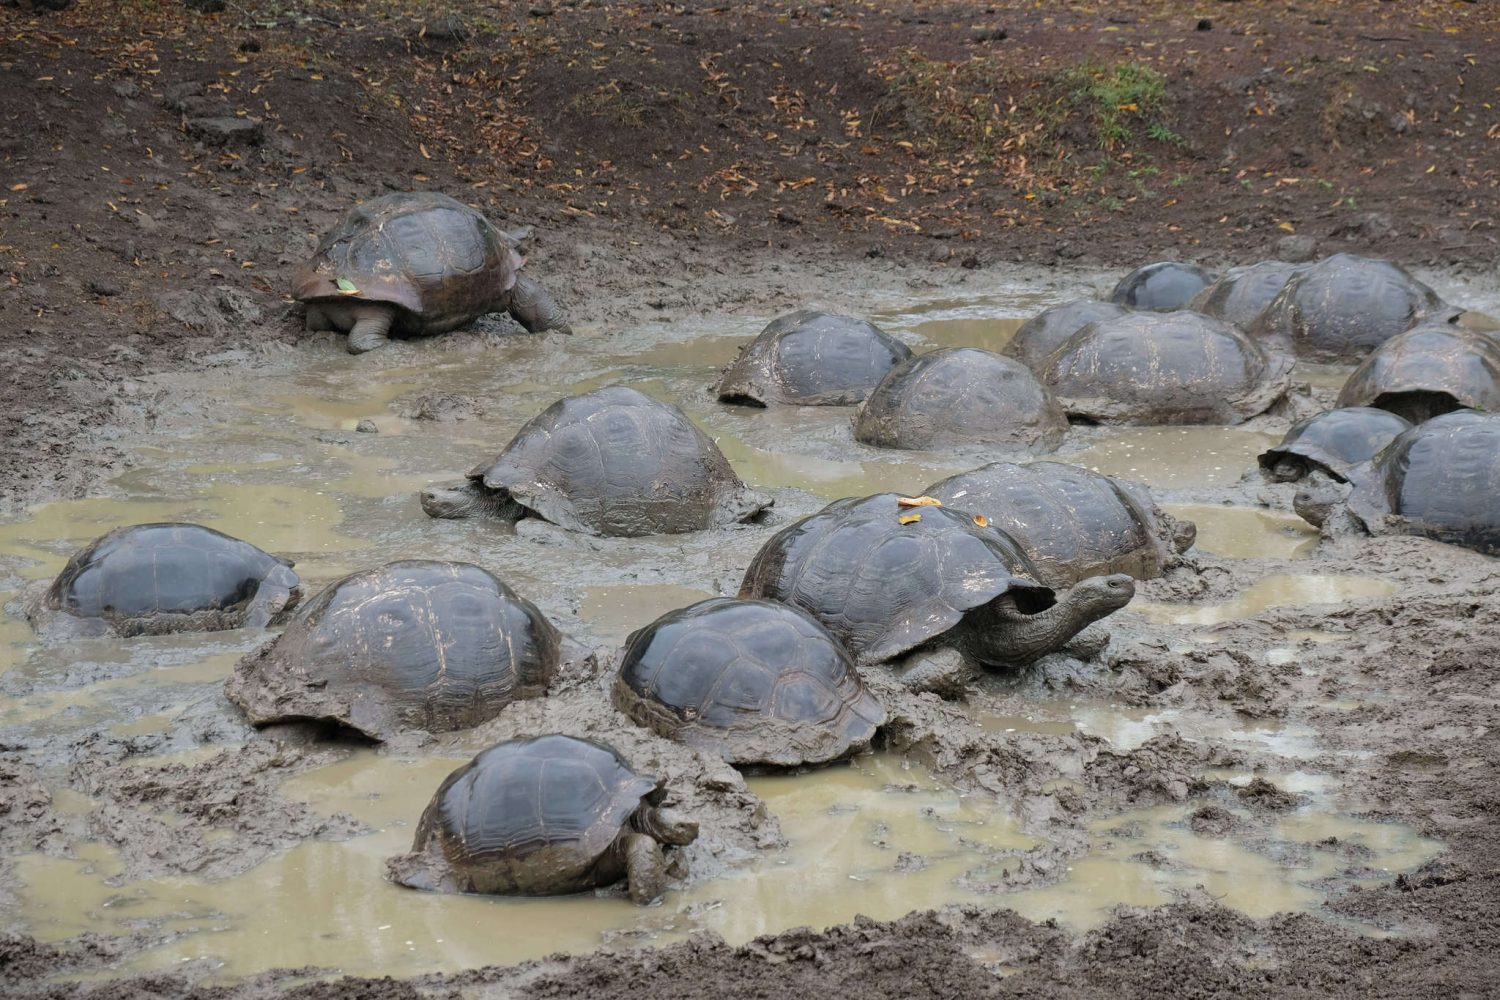 Turtles in the Galapagos Islands